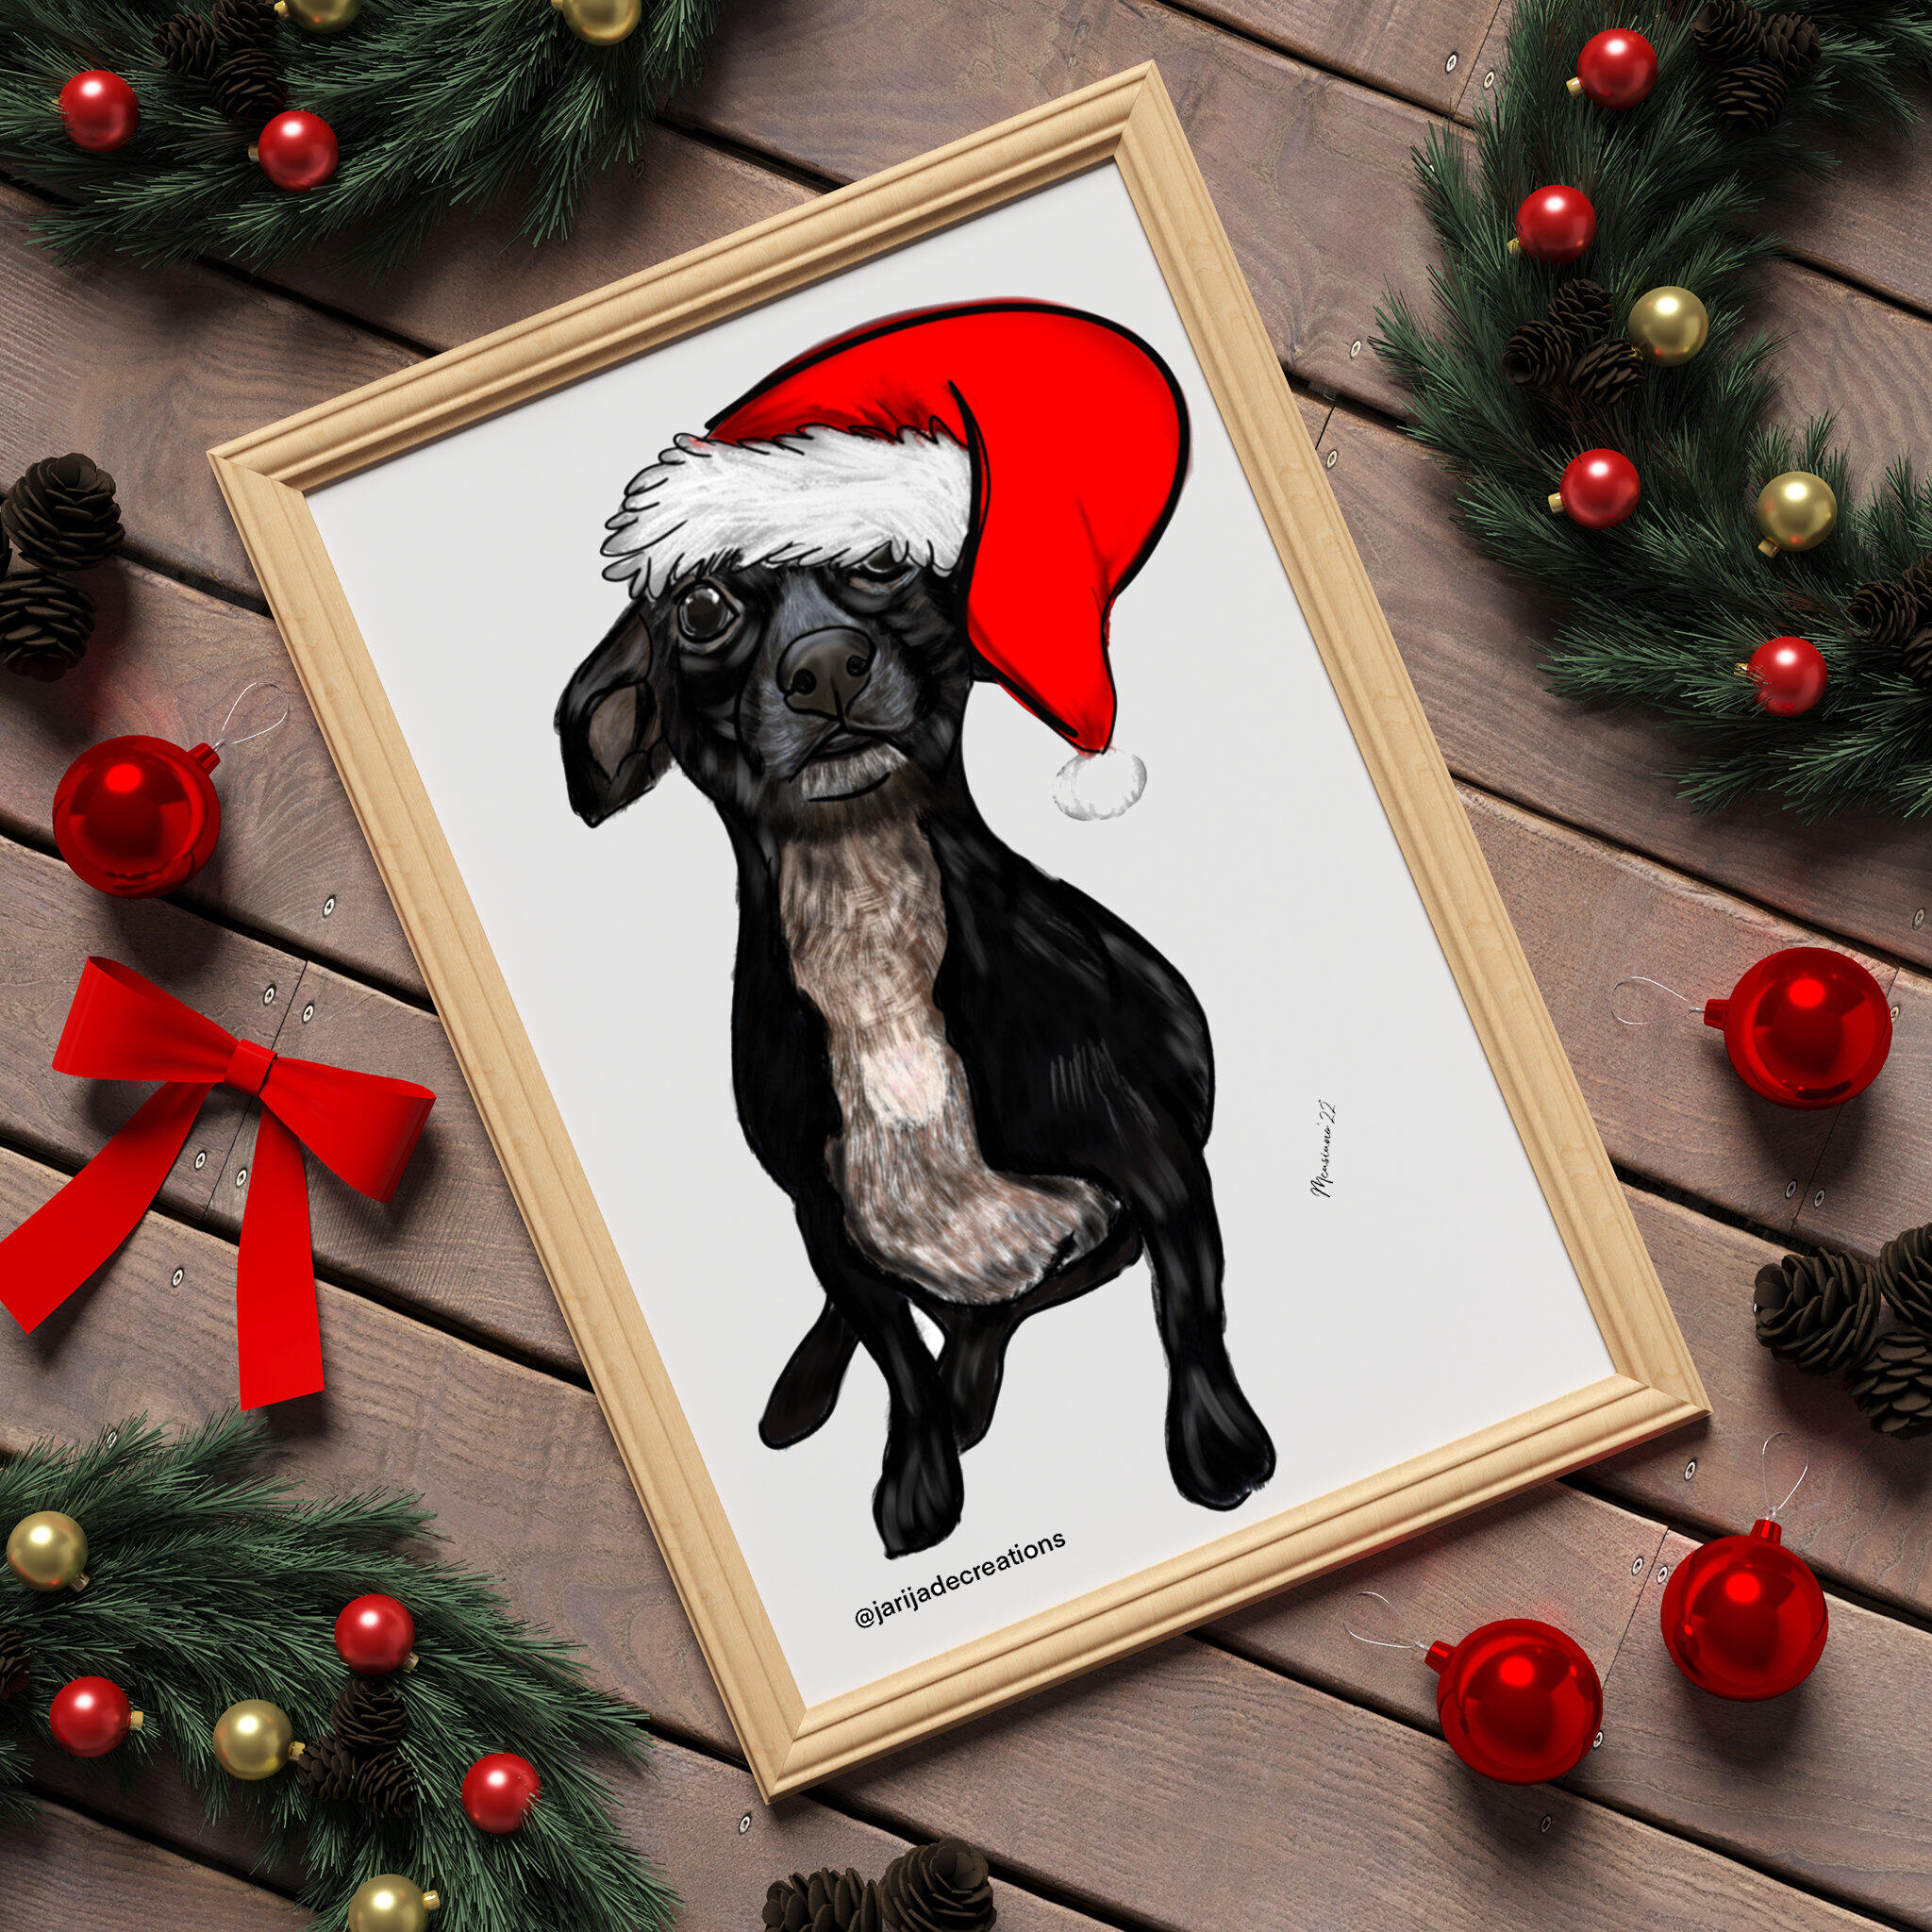 Twenty-two Christmas gifts for dog lovers